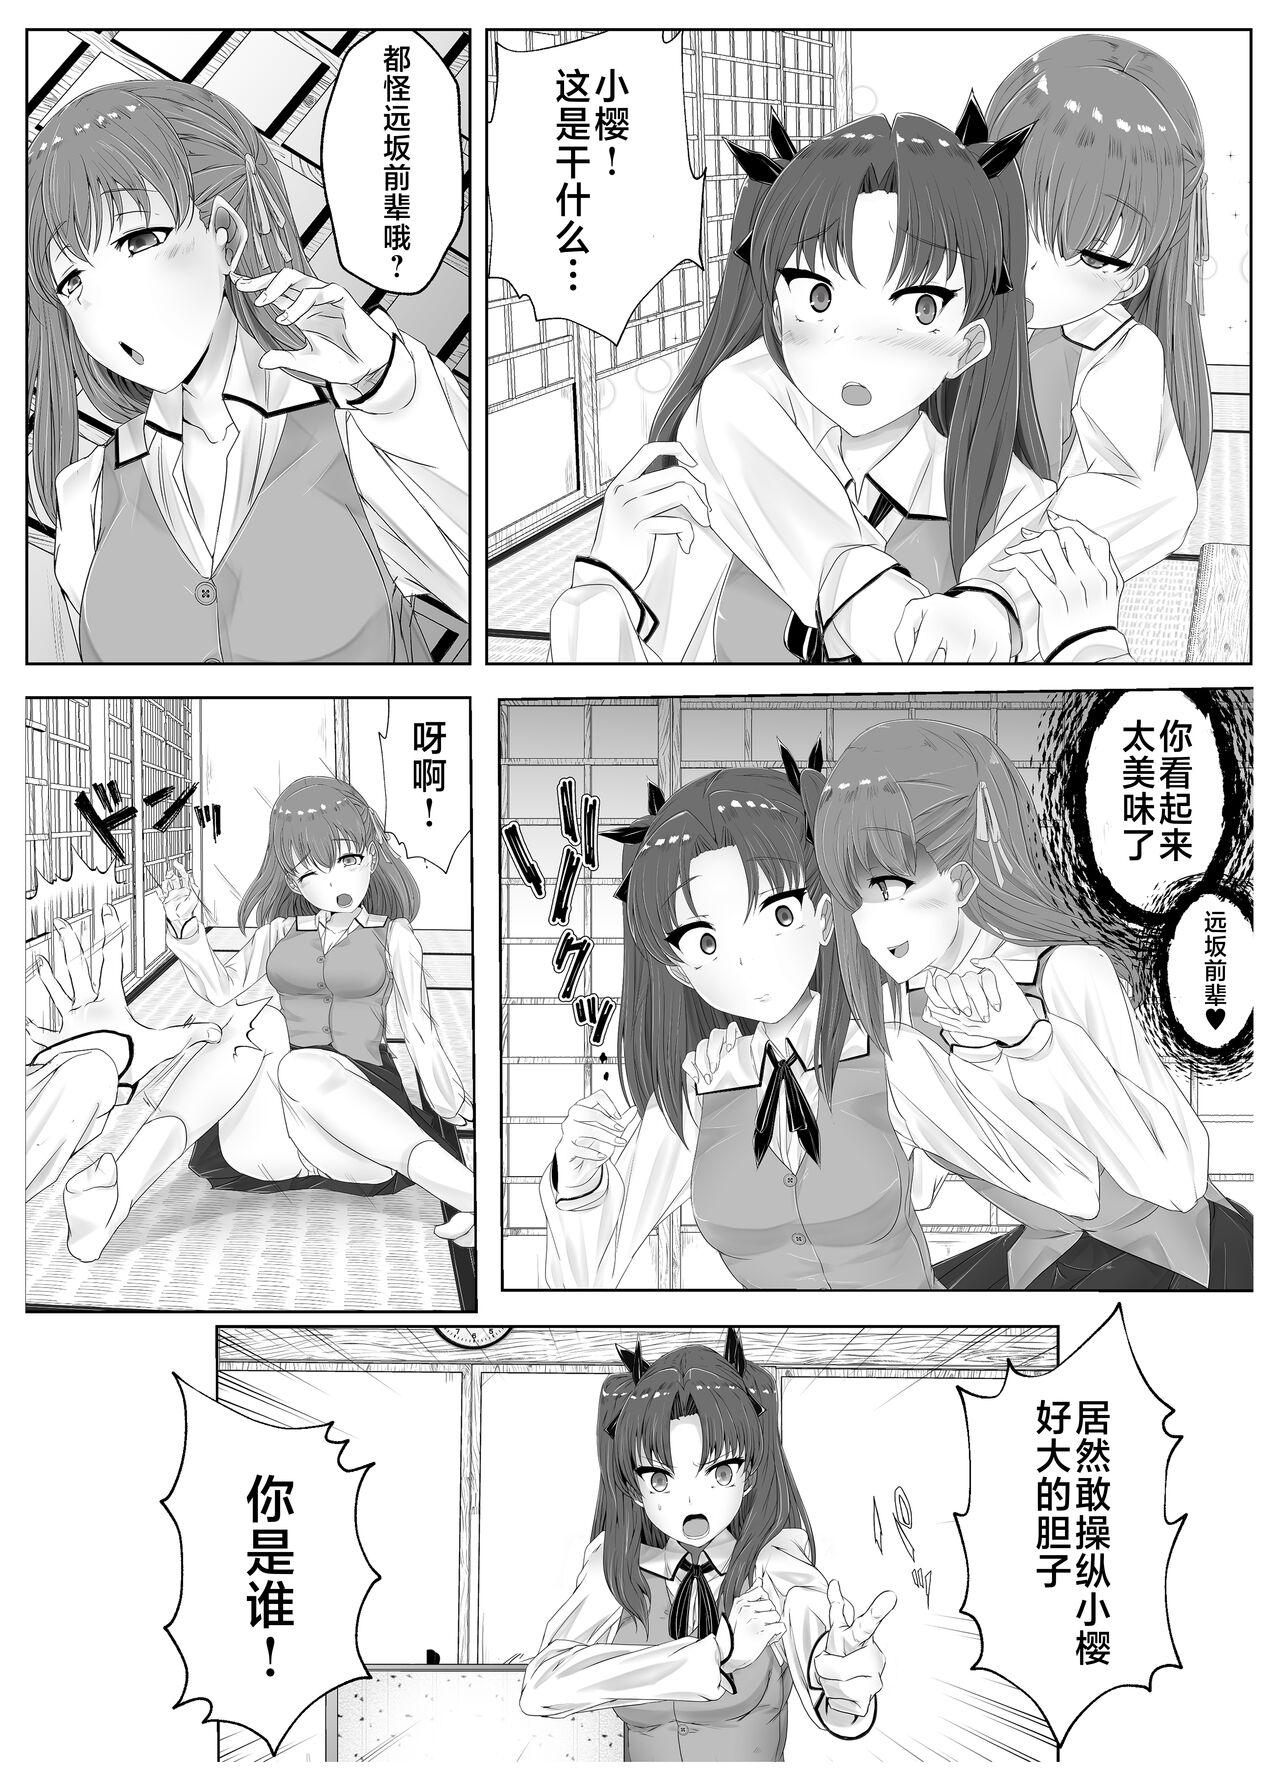 Transexual 遠坂凛乗り換え乗っ取り - Fate stay night Gay Skinny - Page 2